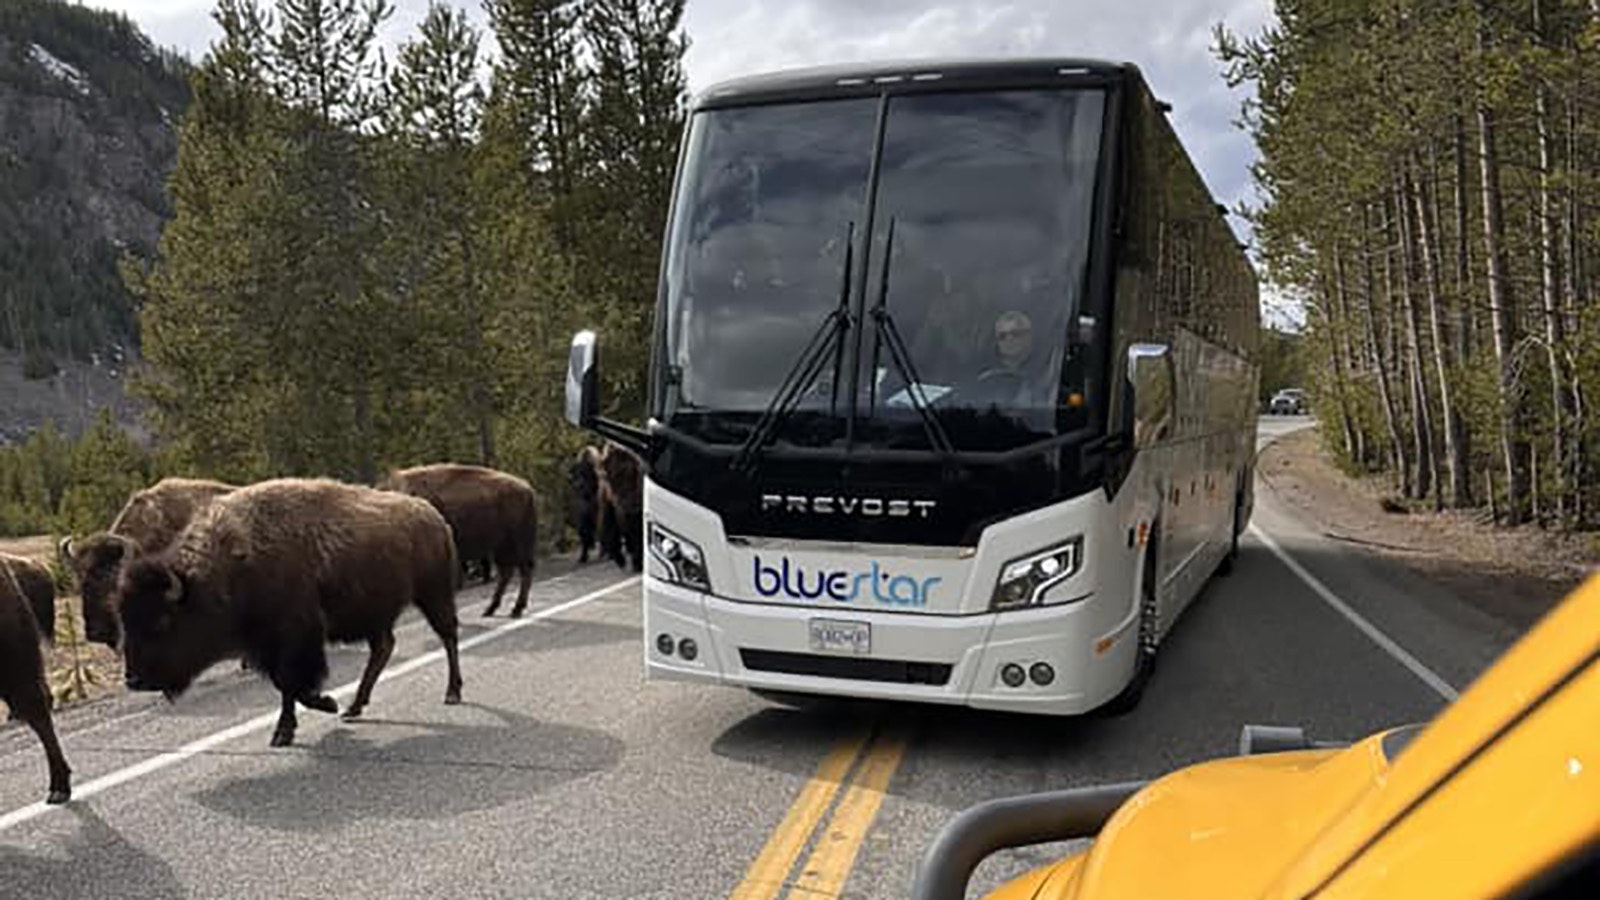 Rhea Cicale, a top contributor to the popular Facebook page Yellowstone National Park: Invasion of the Idots posted these photos Sunday of a Blustar tour bus crossing into the wrong lane of travel to push ahead through a bison jam in the park.